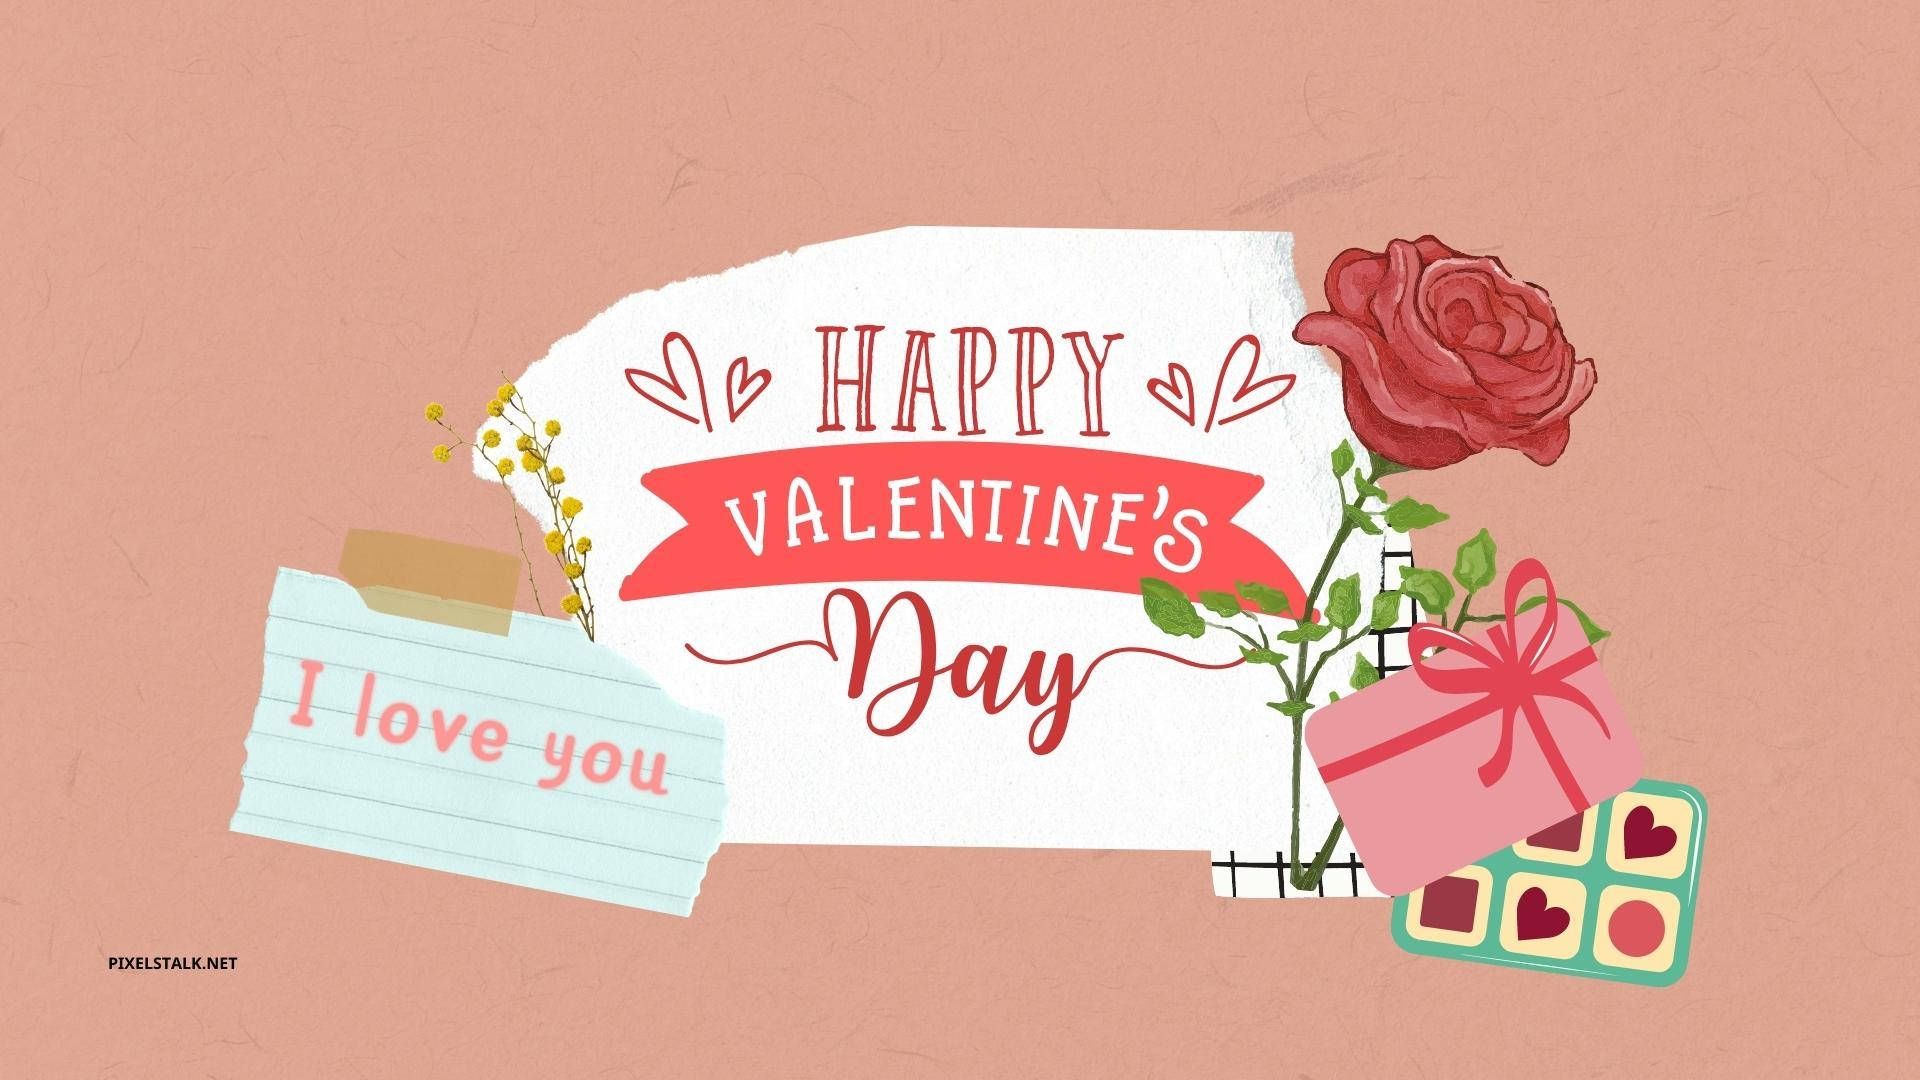 A valentine's day wallpaper with a rose, a gift, and a note that says 